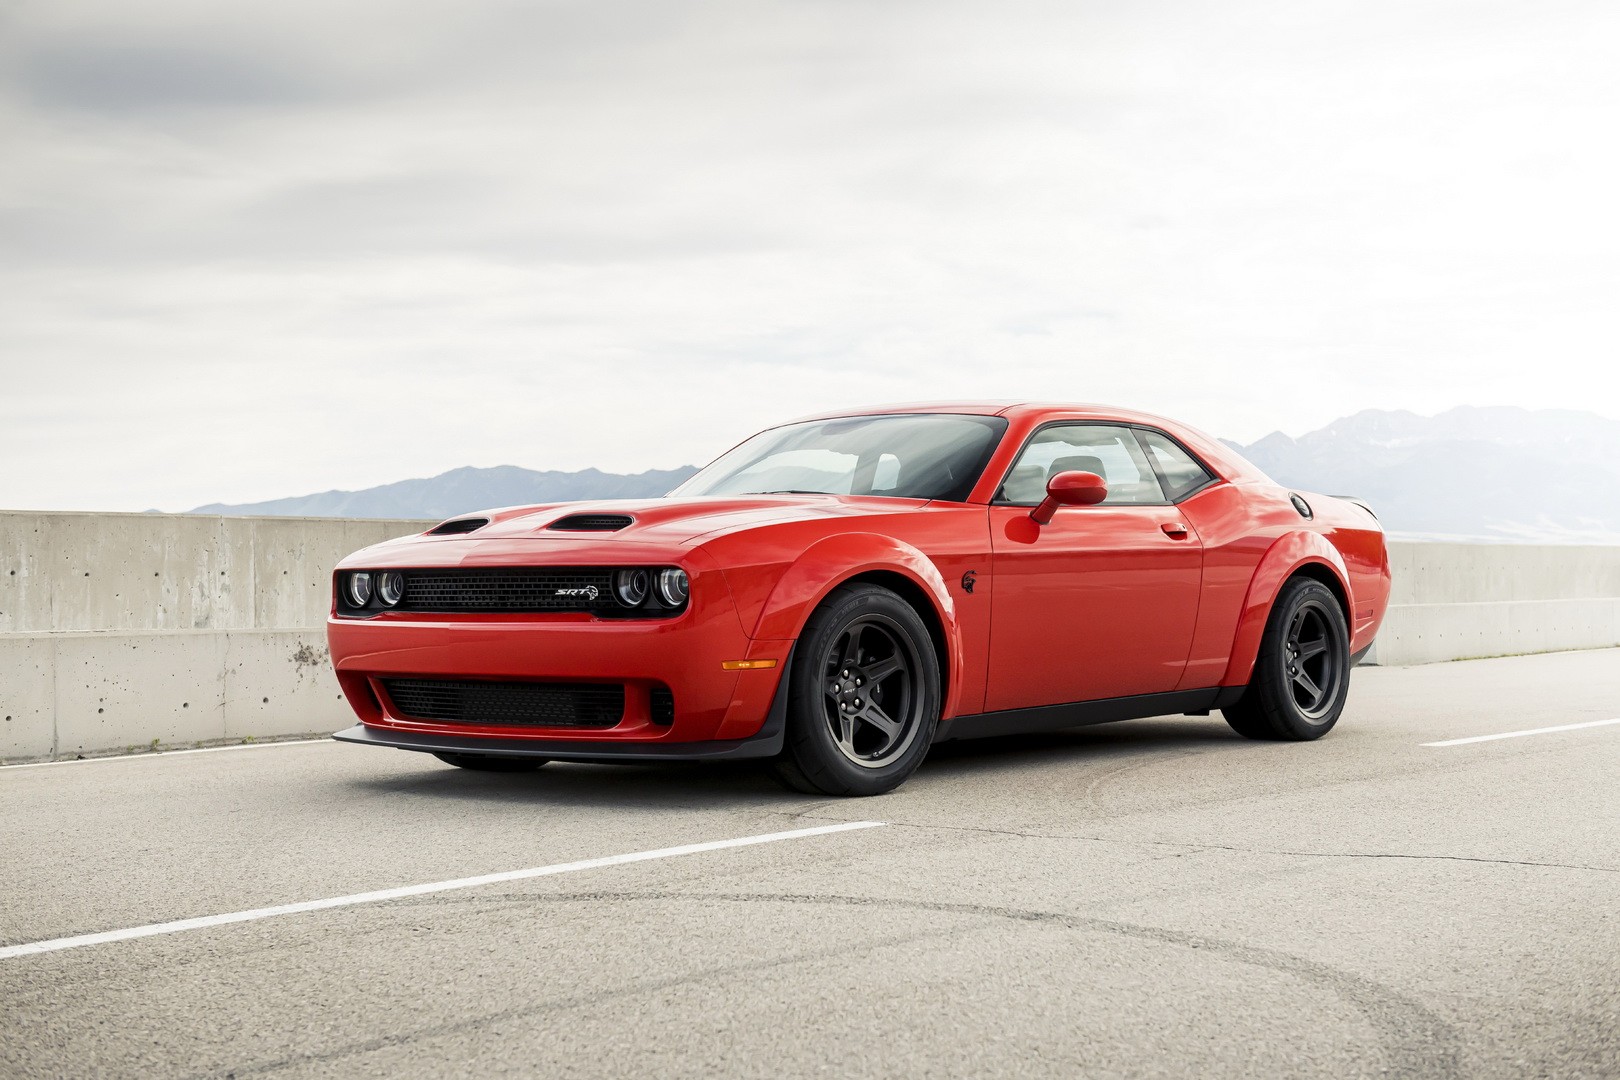 Dodge Electric Muscle Car Confirmed for 2024, Better Dust Off Those